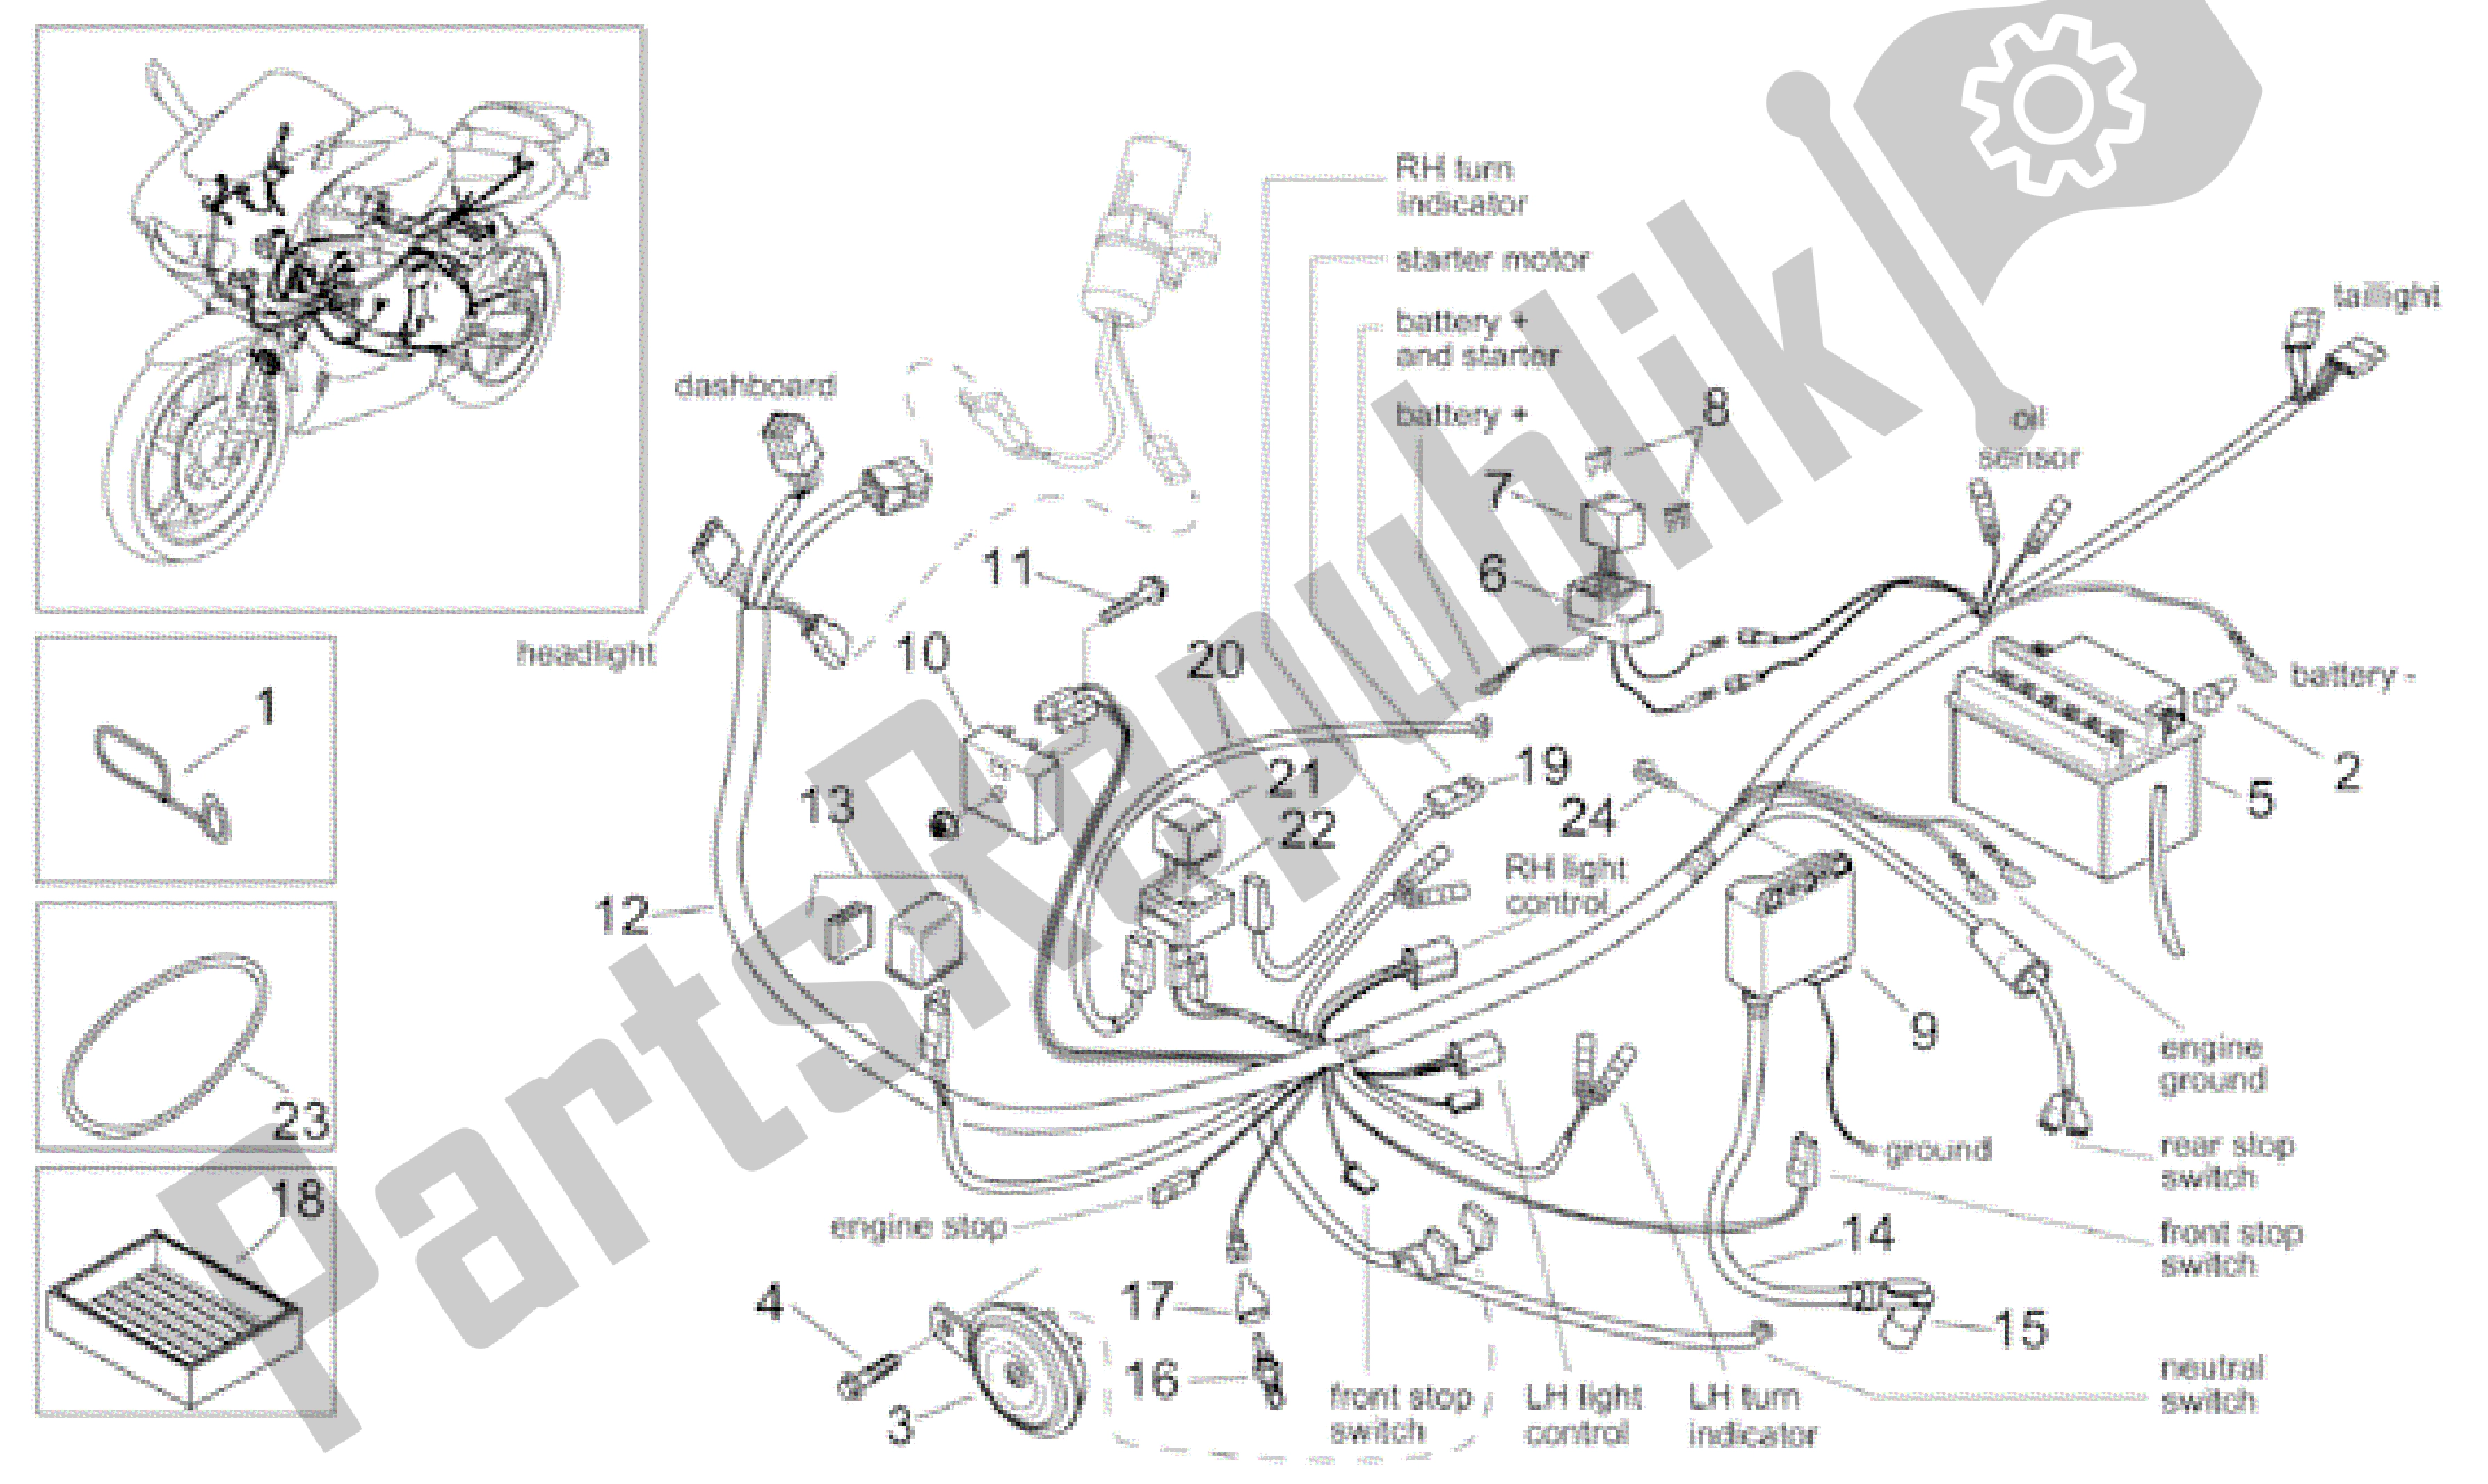 All parts for the Electrical System of the Aprilia RS 50 1999 - 2005